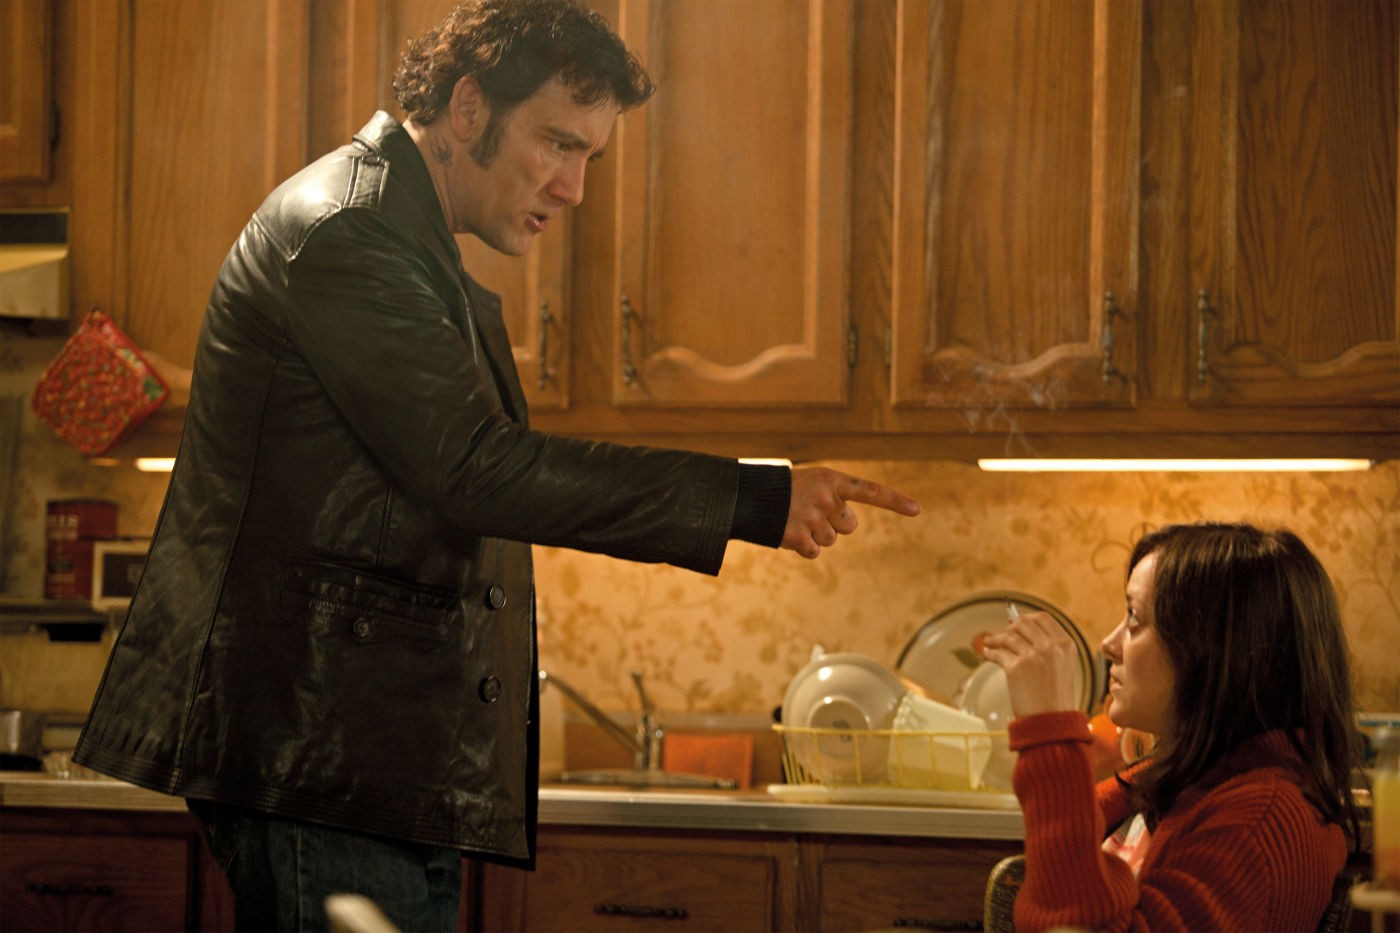 Clive Owen stars as Chris Pierzynski and Marion Cotillard stars as Monica in Roadside Attractions' Blood Ties (2014)